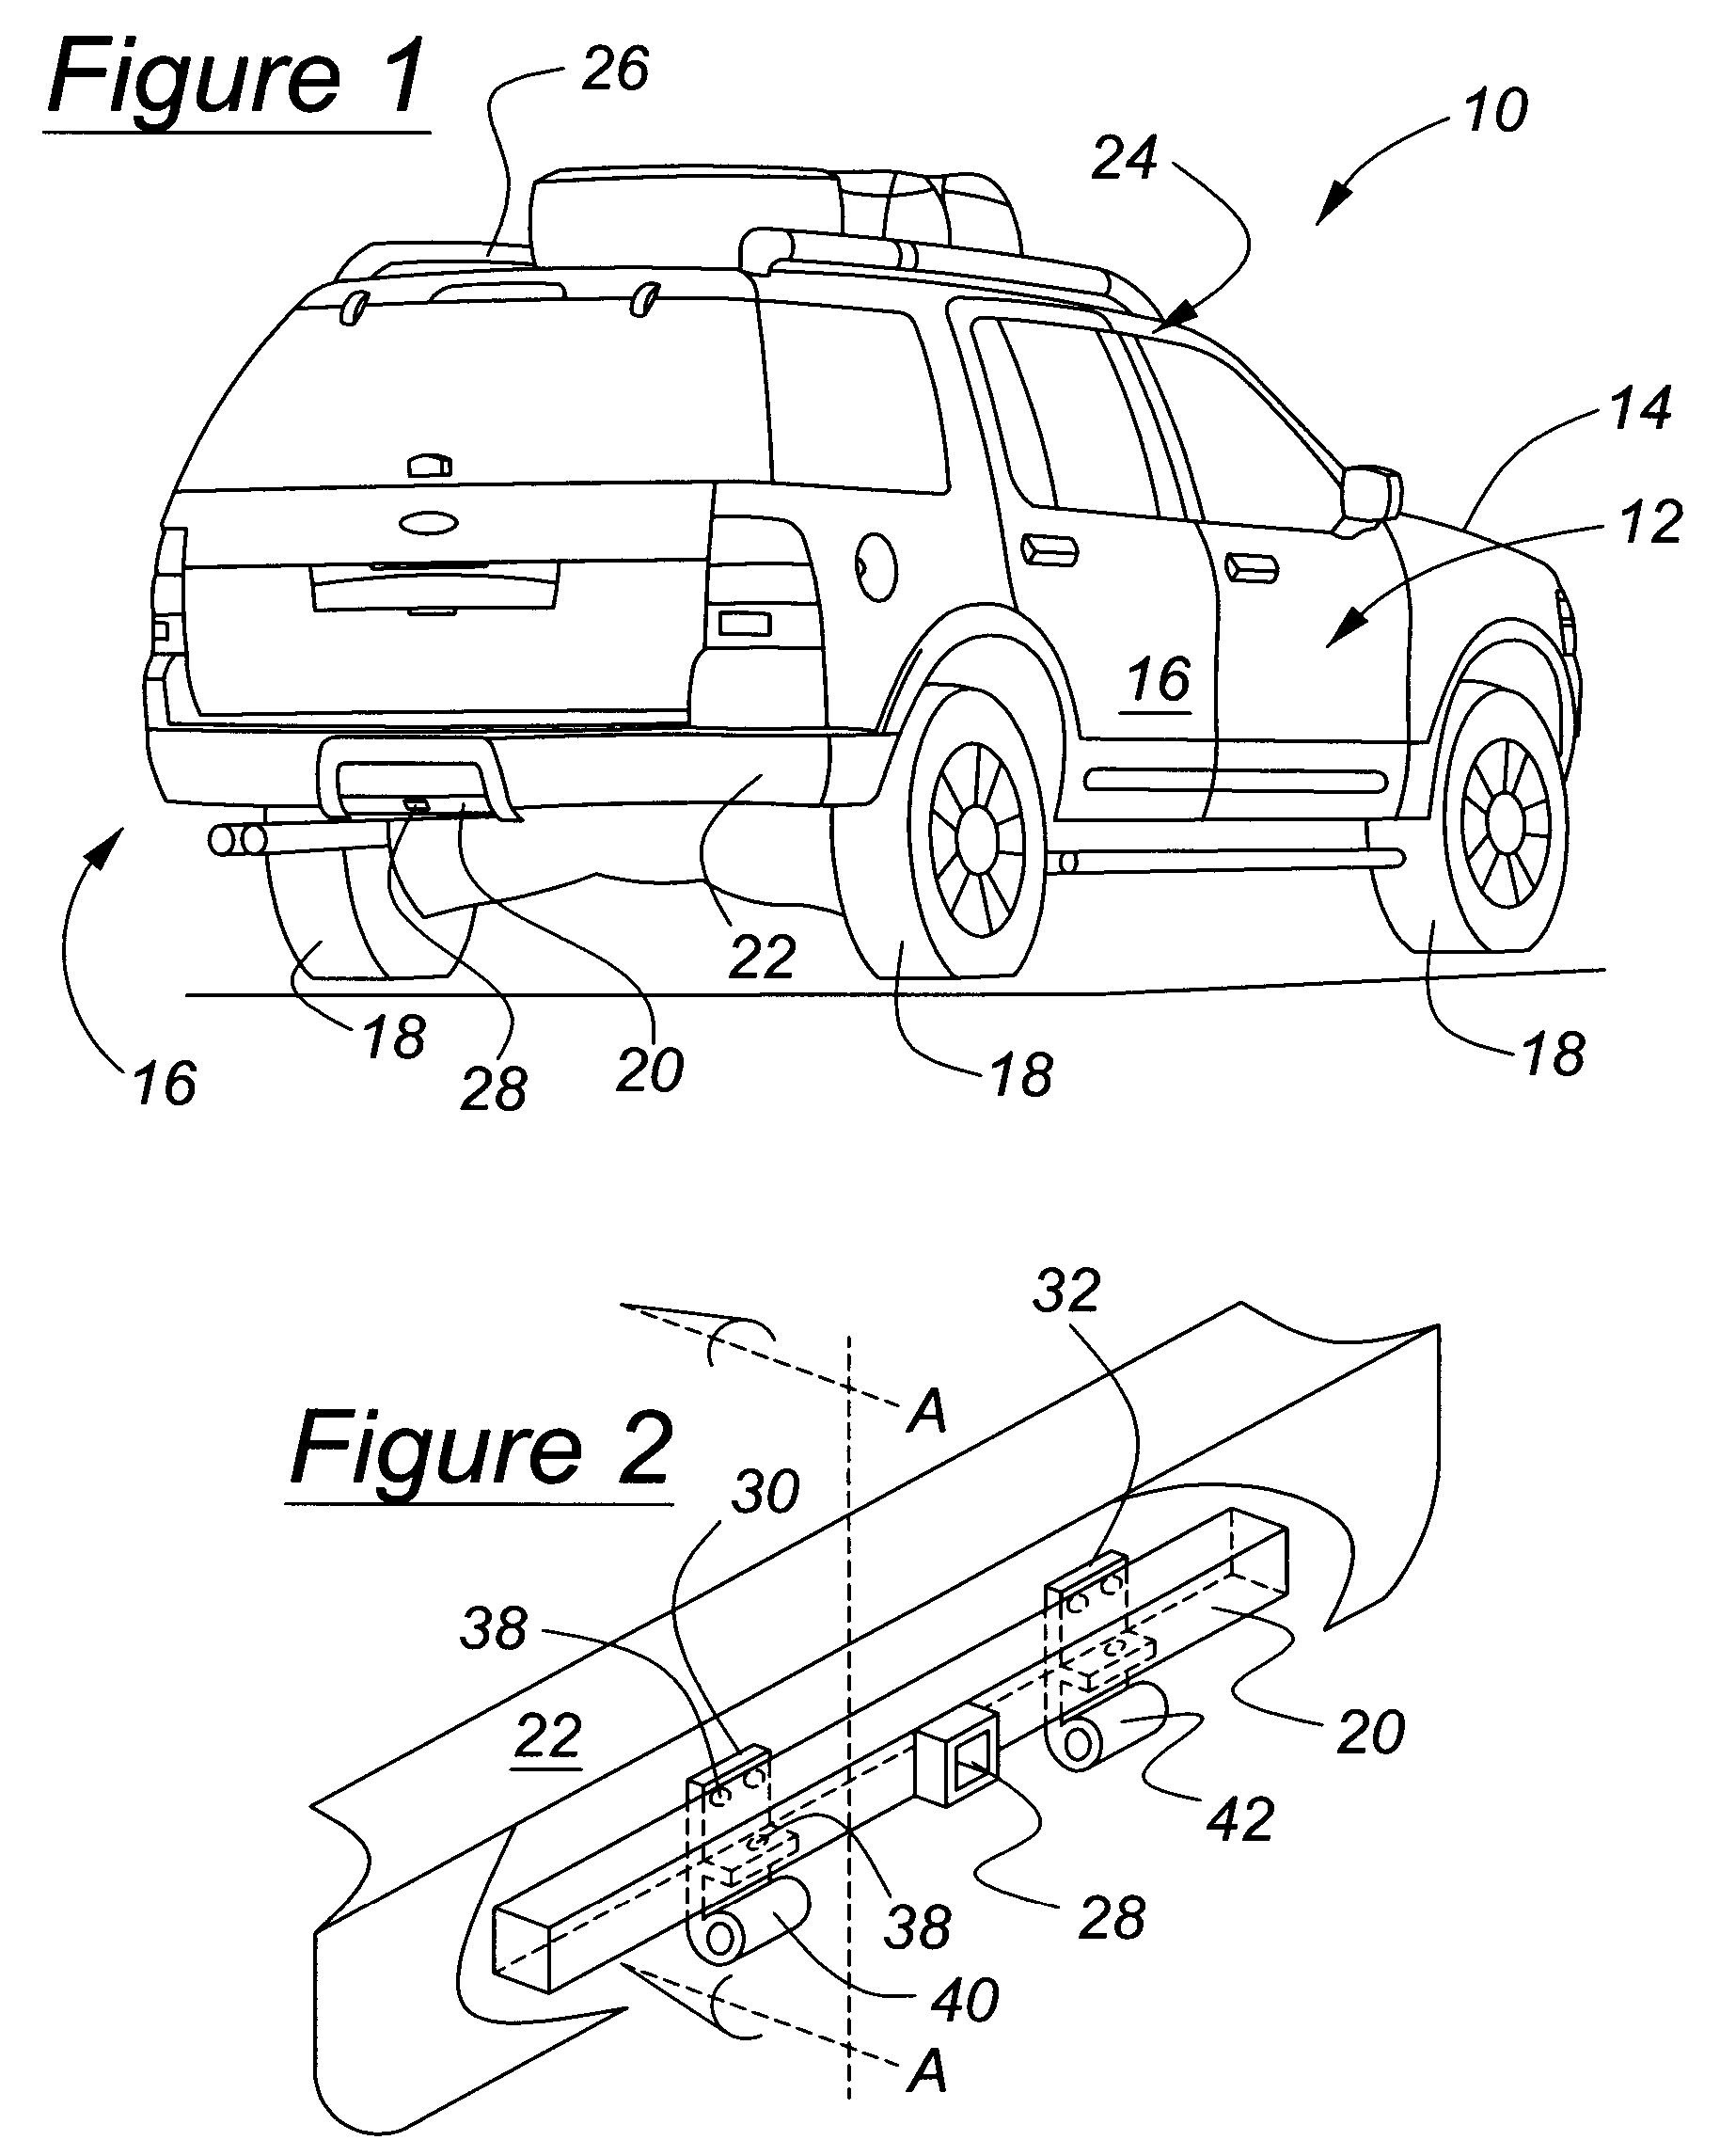 Deployable step for motor vehicles